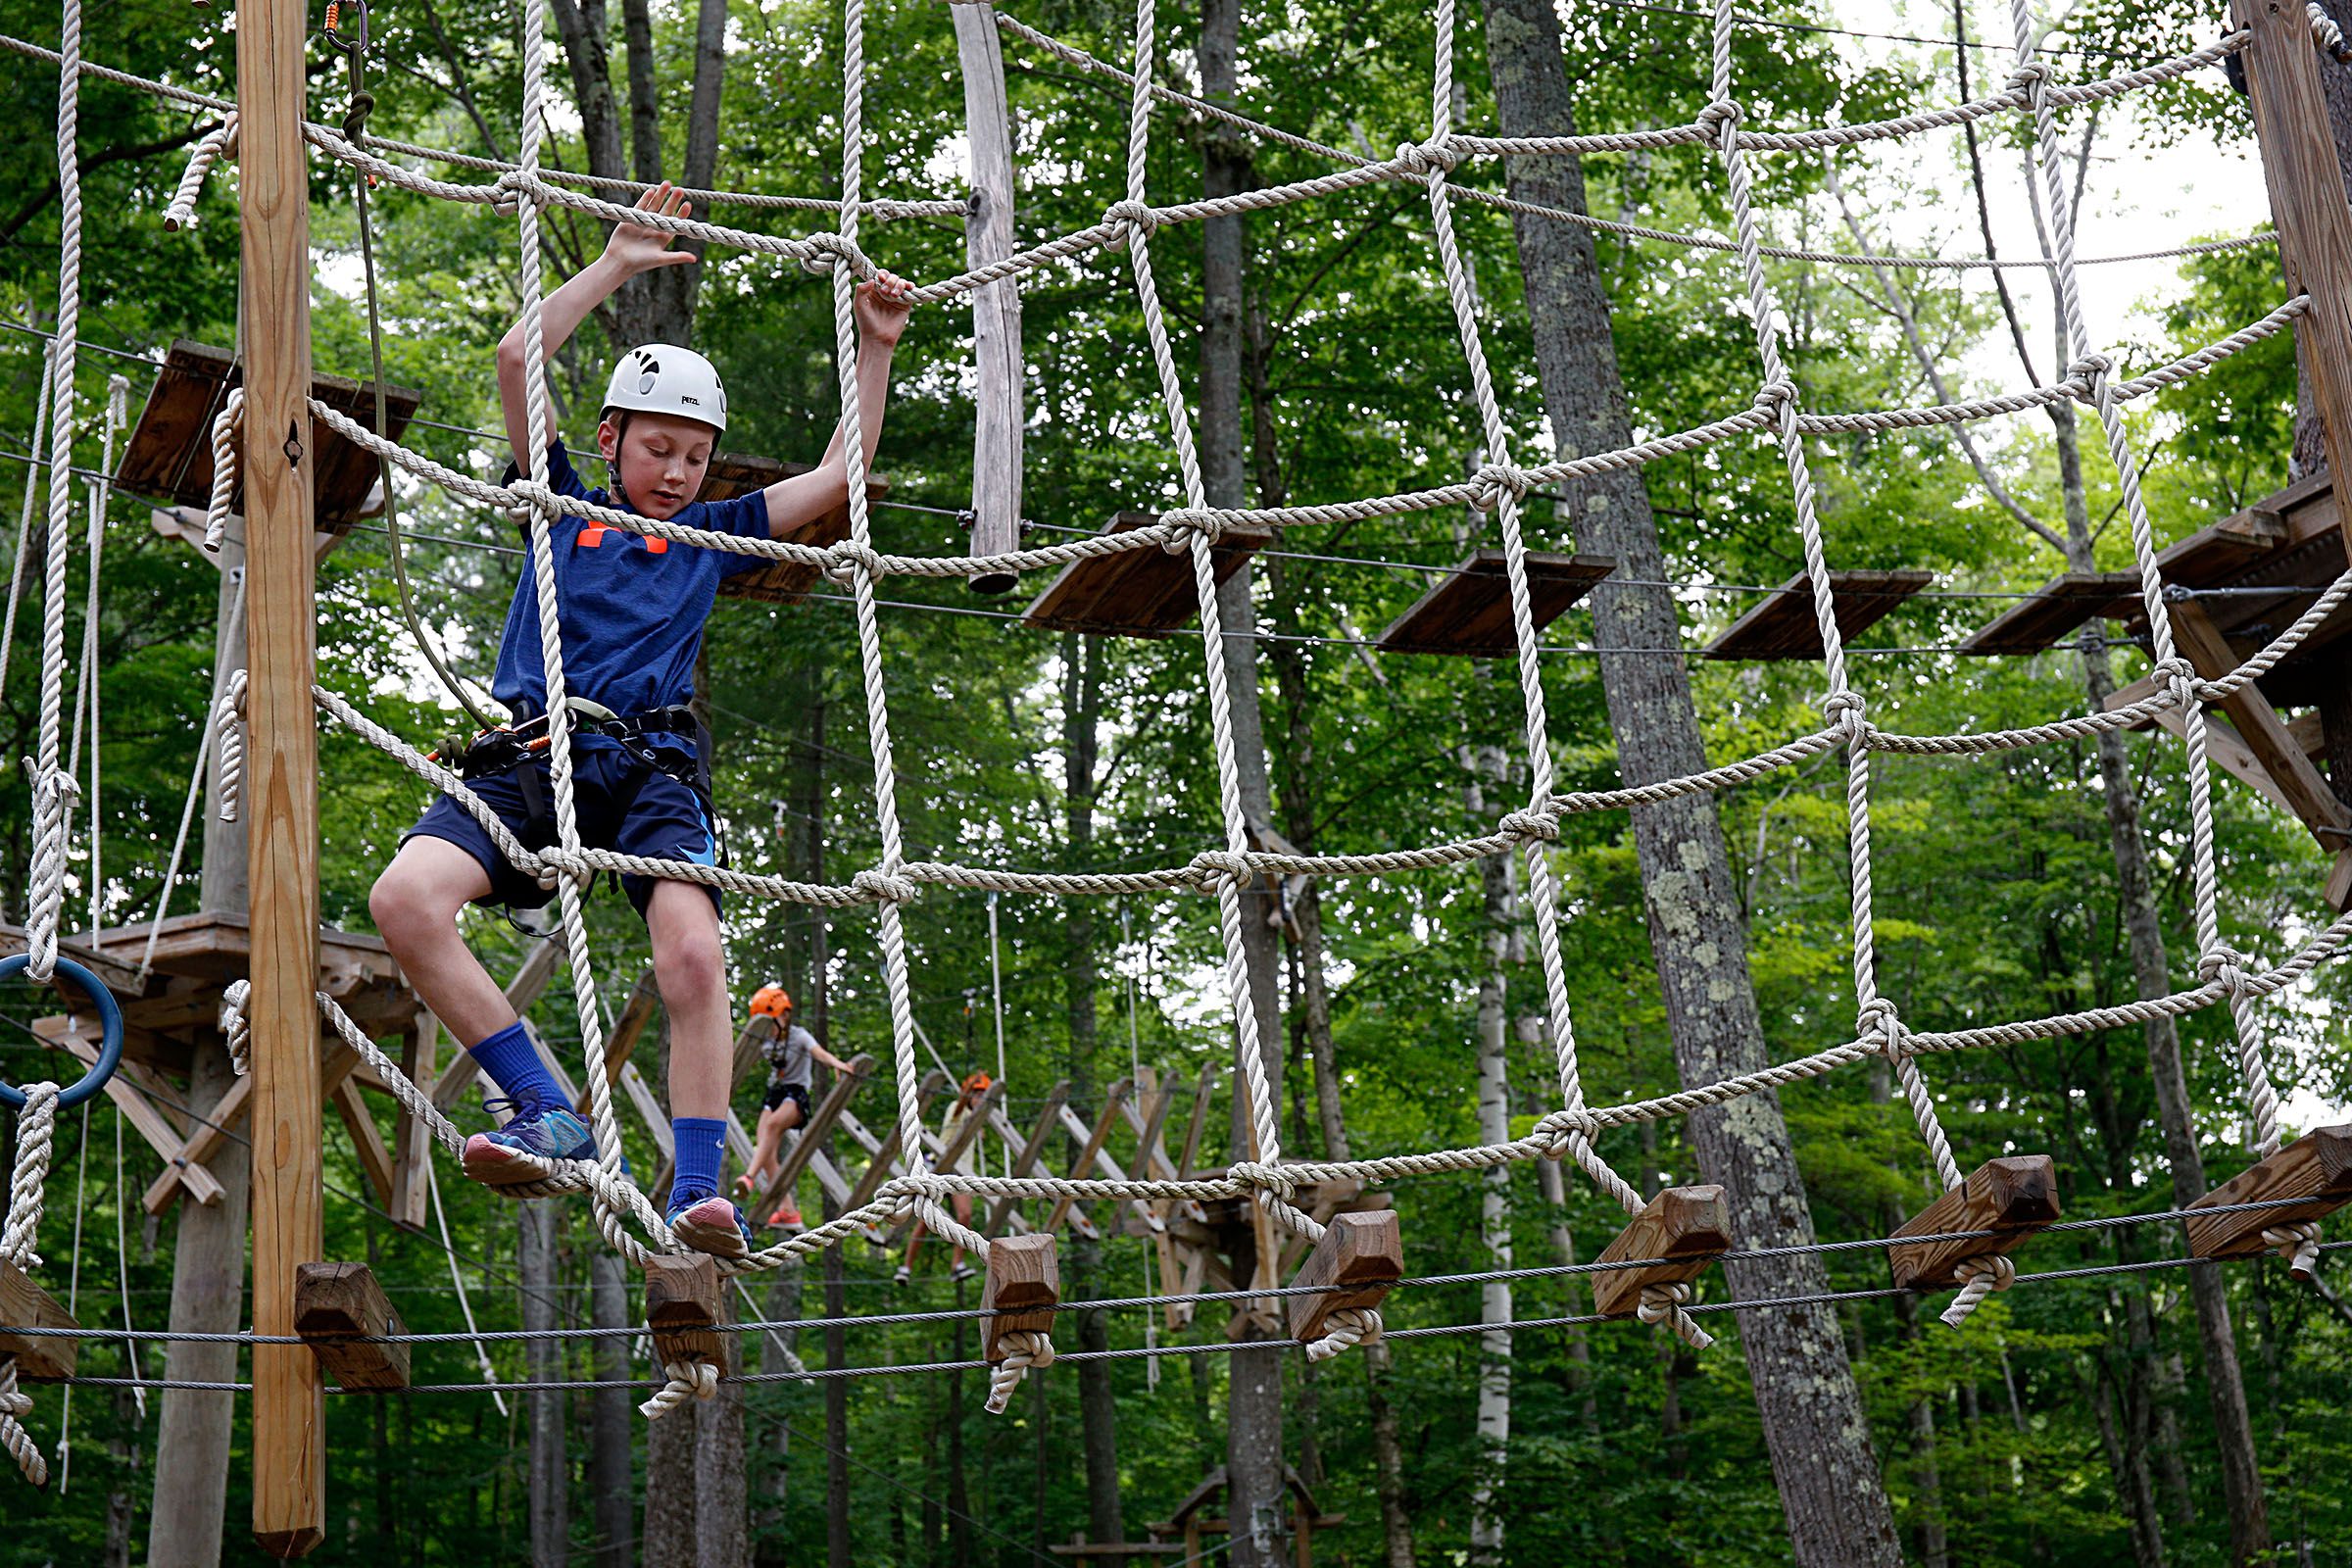 Ryan Flaherty, 12, of Foxborough, Mass., maneuvers through the Aerial Challenge Course at Mount Sunapee Resort's Adventure Park in Sunapee, N.H., on July 14, 2018. The resort has added several recreational activities for summertime enjoyment. (Valley News - Geoff Hansen) Copyright Valley News. May not be reprinted or used online without permission. Send requests to permission@vnews.com.